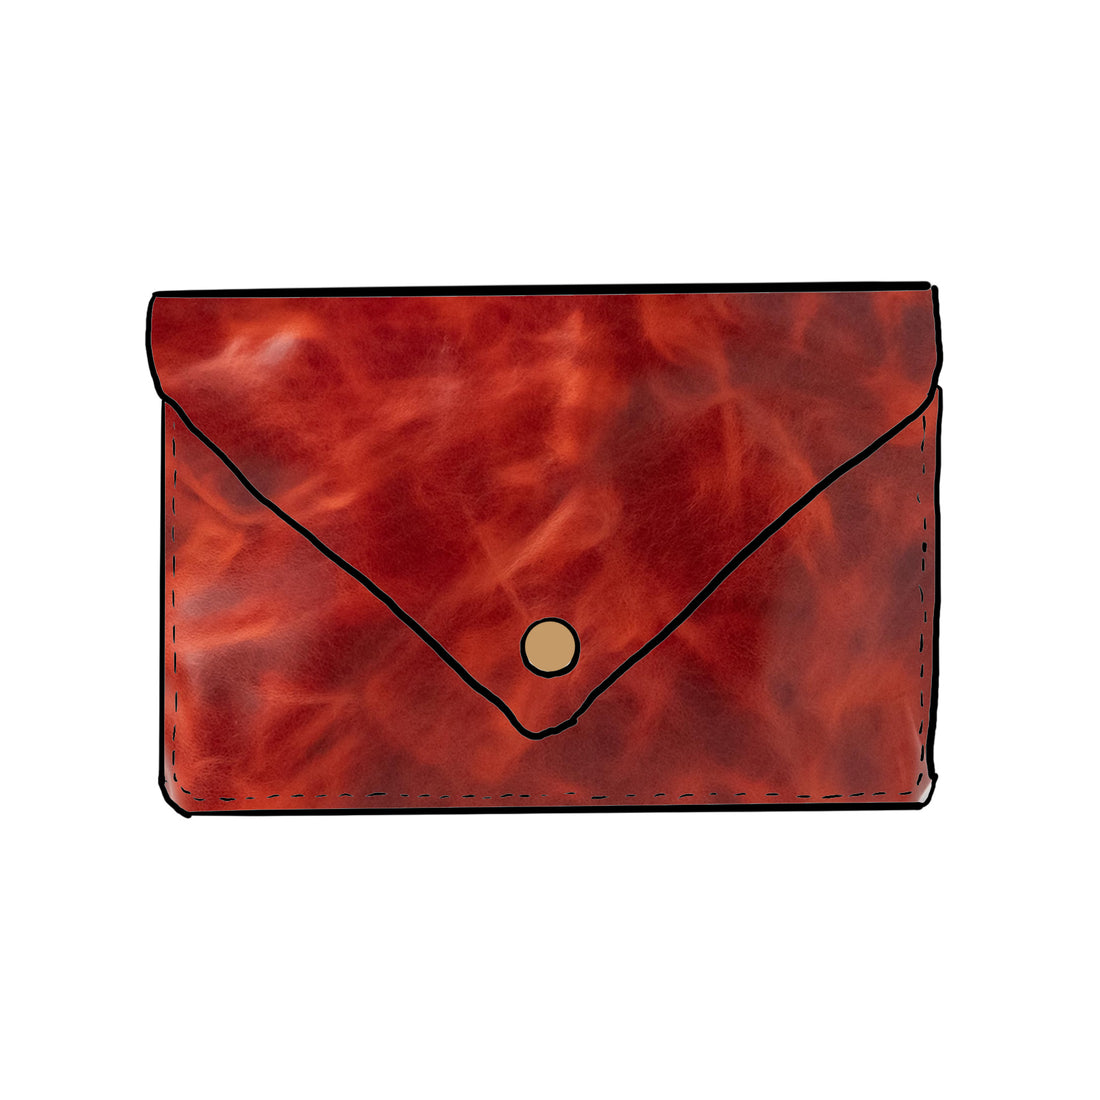 Lava Leather Clutch